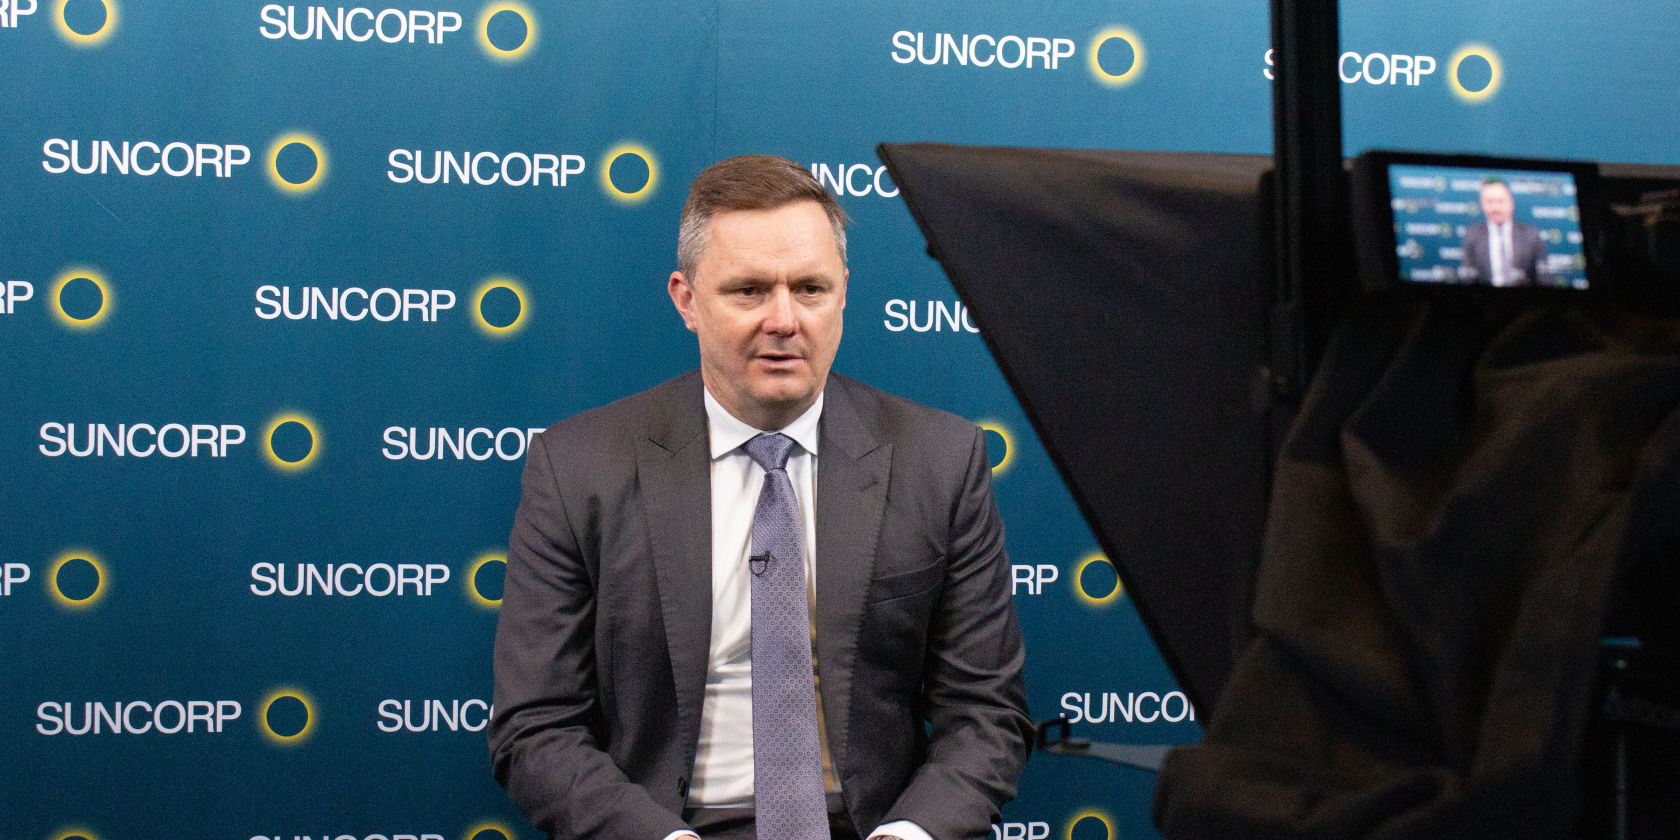 Suncorp Group delivers strong FY21 results